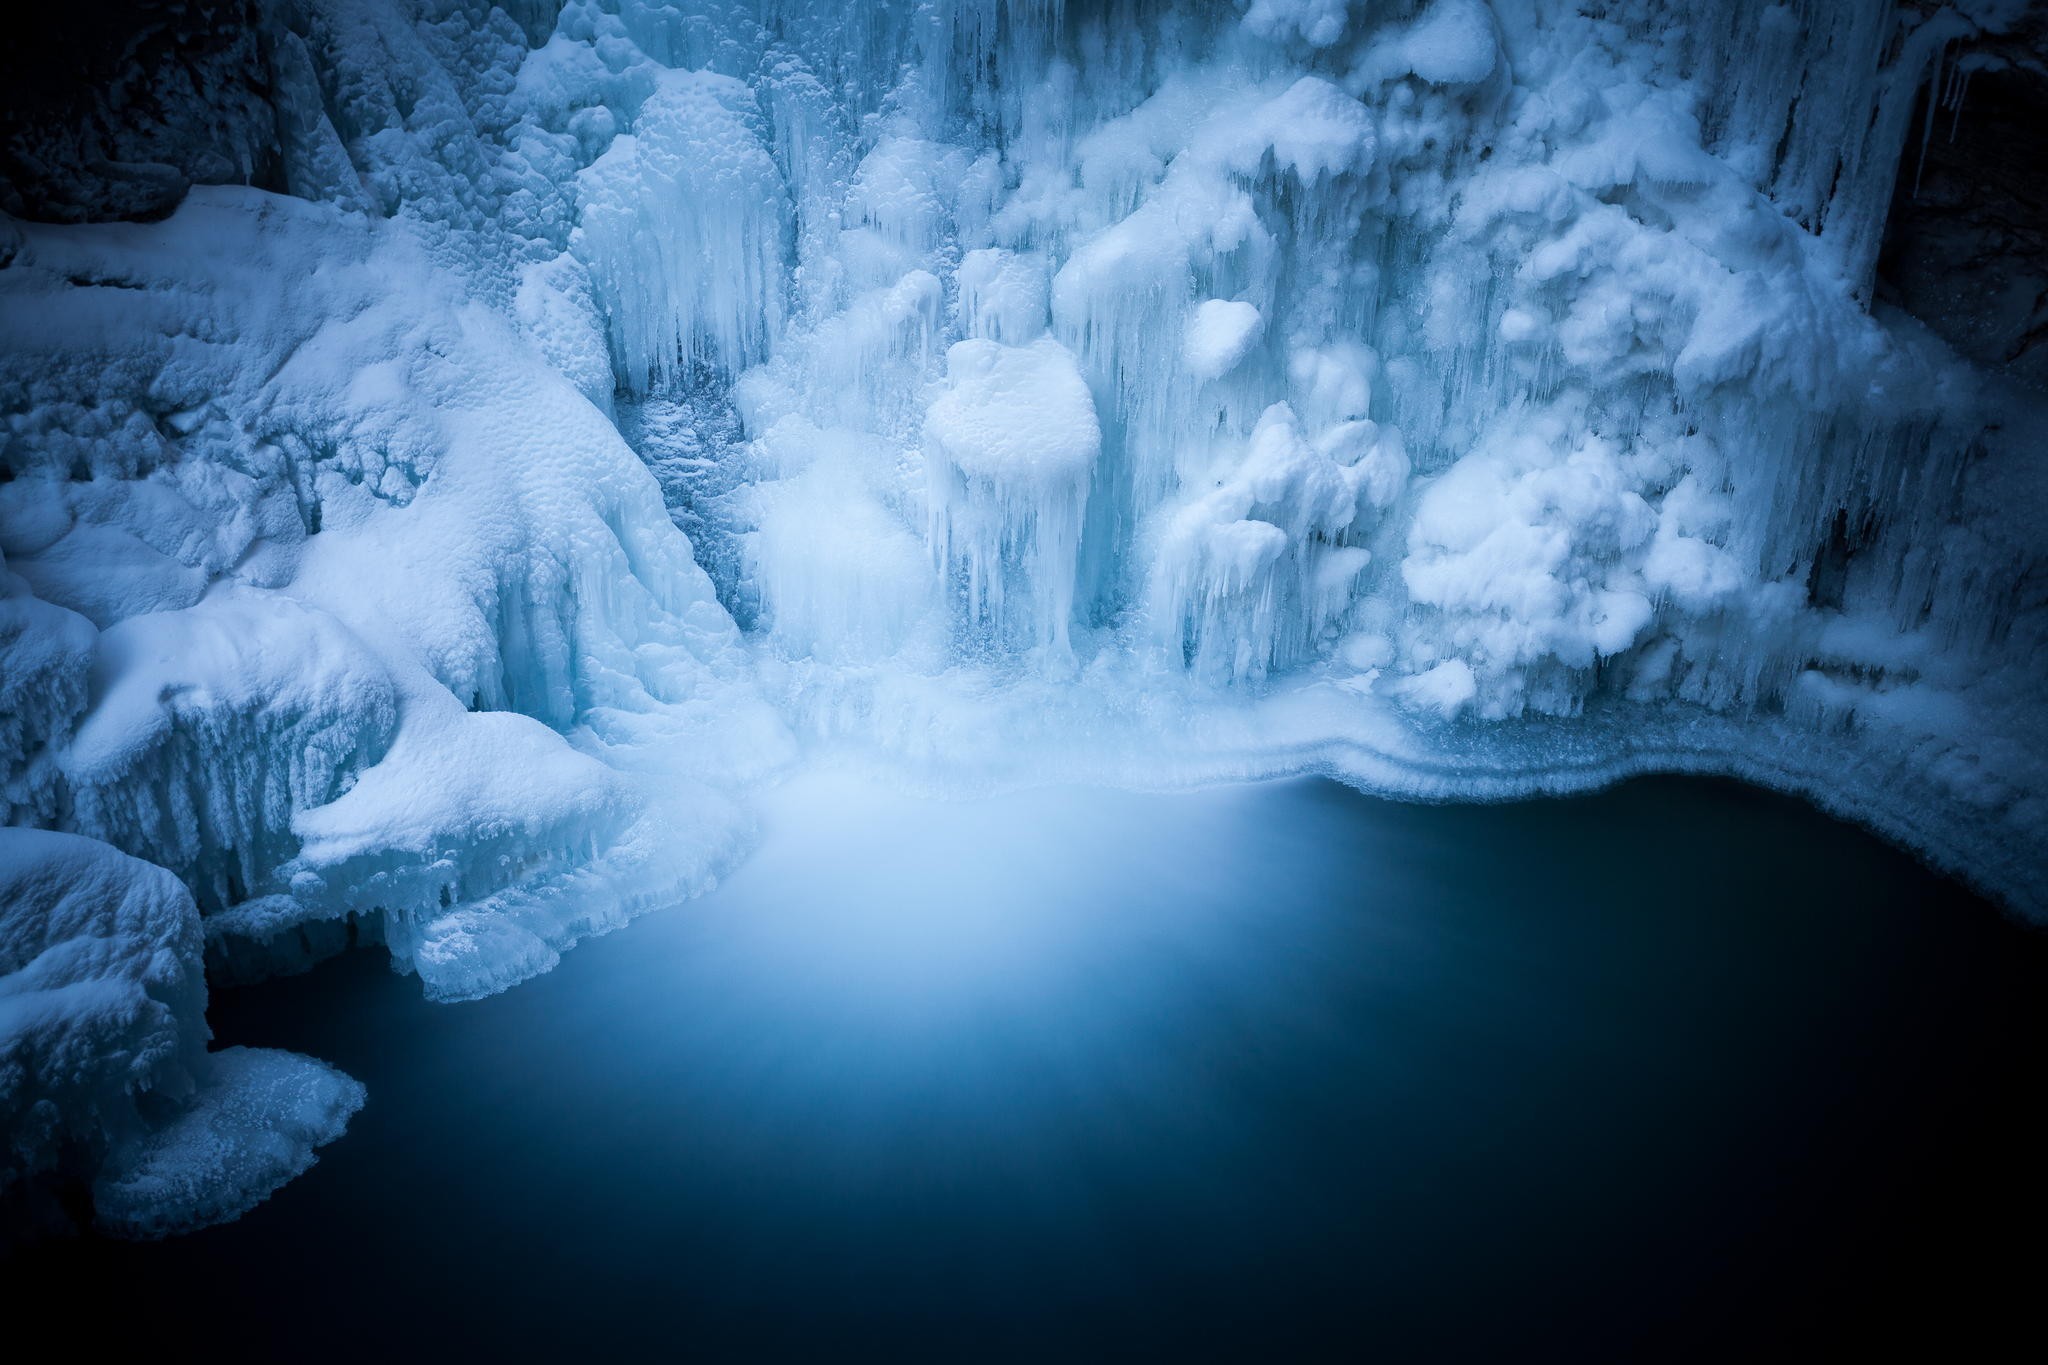 General 2048x1365 nature winter snow ice water waterfall long exposure frost